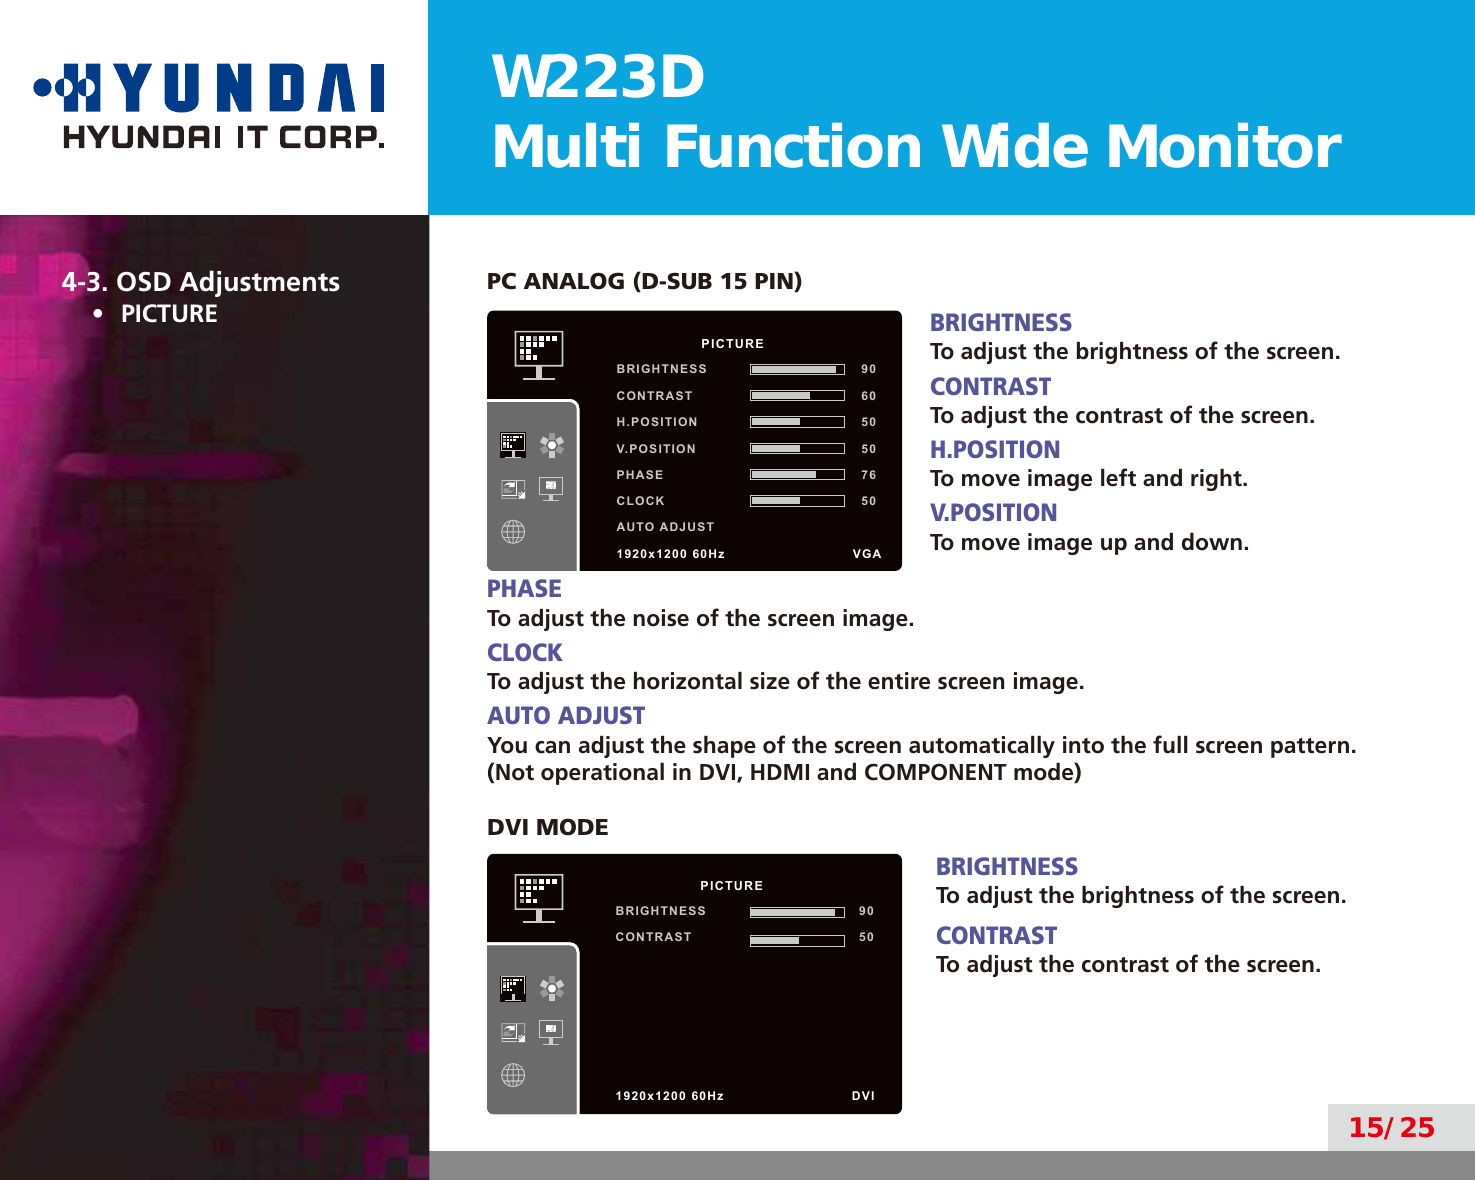 W223DMulti Function Wide Monitor15/254-3. OSD Adjustments•  PICTUREPC ANALOG (D-SUB 15 PIN)BRIGHTNESSTo adjust the brightness of the screen.CONTRASTTo adjust the contrast of the screen.H.POSITIONTo move image left and right.V.POSITIONTo move image up and down.PHASETo adjust the noise of the screen image.CLOCKTo adjust the horizontal size of the entire screen image.AUTO ADJUSTYou can adjust the shape of the screen automatically into the full screen pattern.(Not operational in DVI, HDMI and COMPONENT mode)DVI MODEBRIGHTNESSTo adjust the brightness of the screen.CONTRASTTo adjust the contrast of the screen.          PICTUREBRIGHTNESS 90CONTRAST 60H.POSITION 50V.POSITION 50PHASE 76CLOCK 50AUTO ADJUST1920x1200 60Hz               VGA          PICTUREBRIGHTNESS 90CONTRAST 501920x1200 60Hz               DVI